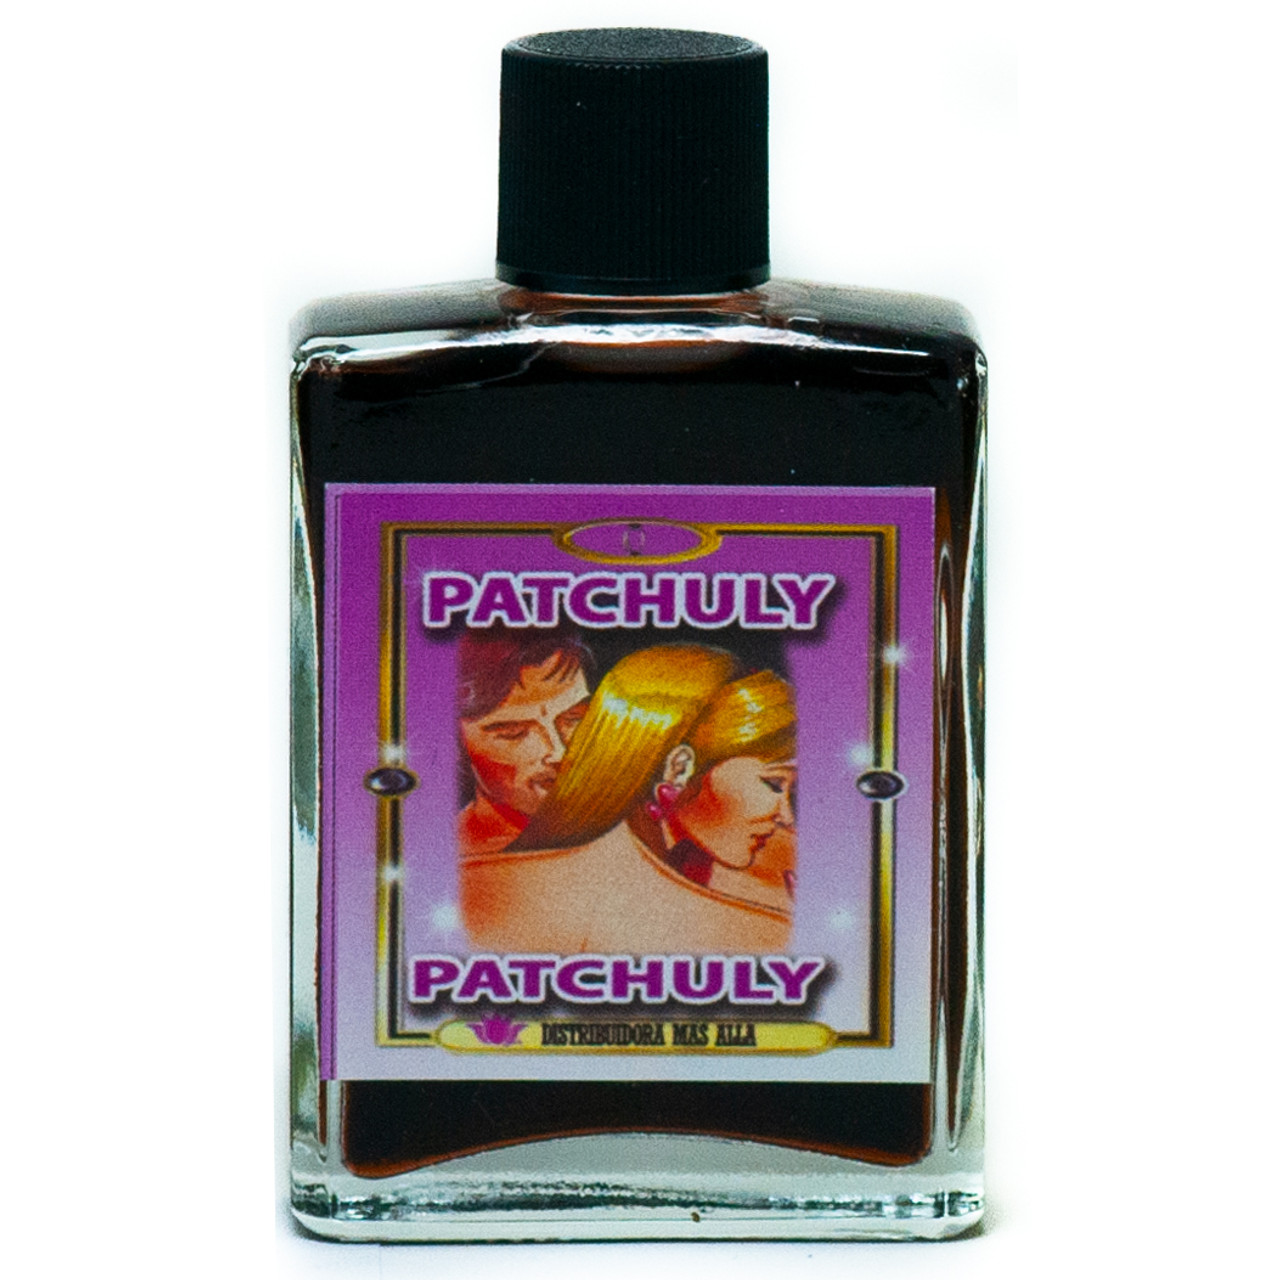 Perfume Patchuly - Patchuly Perfume